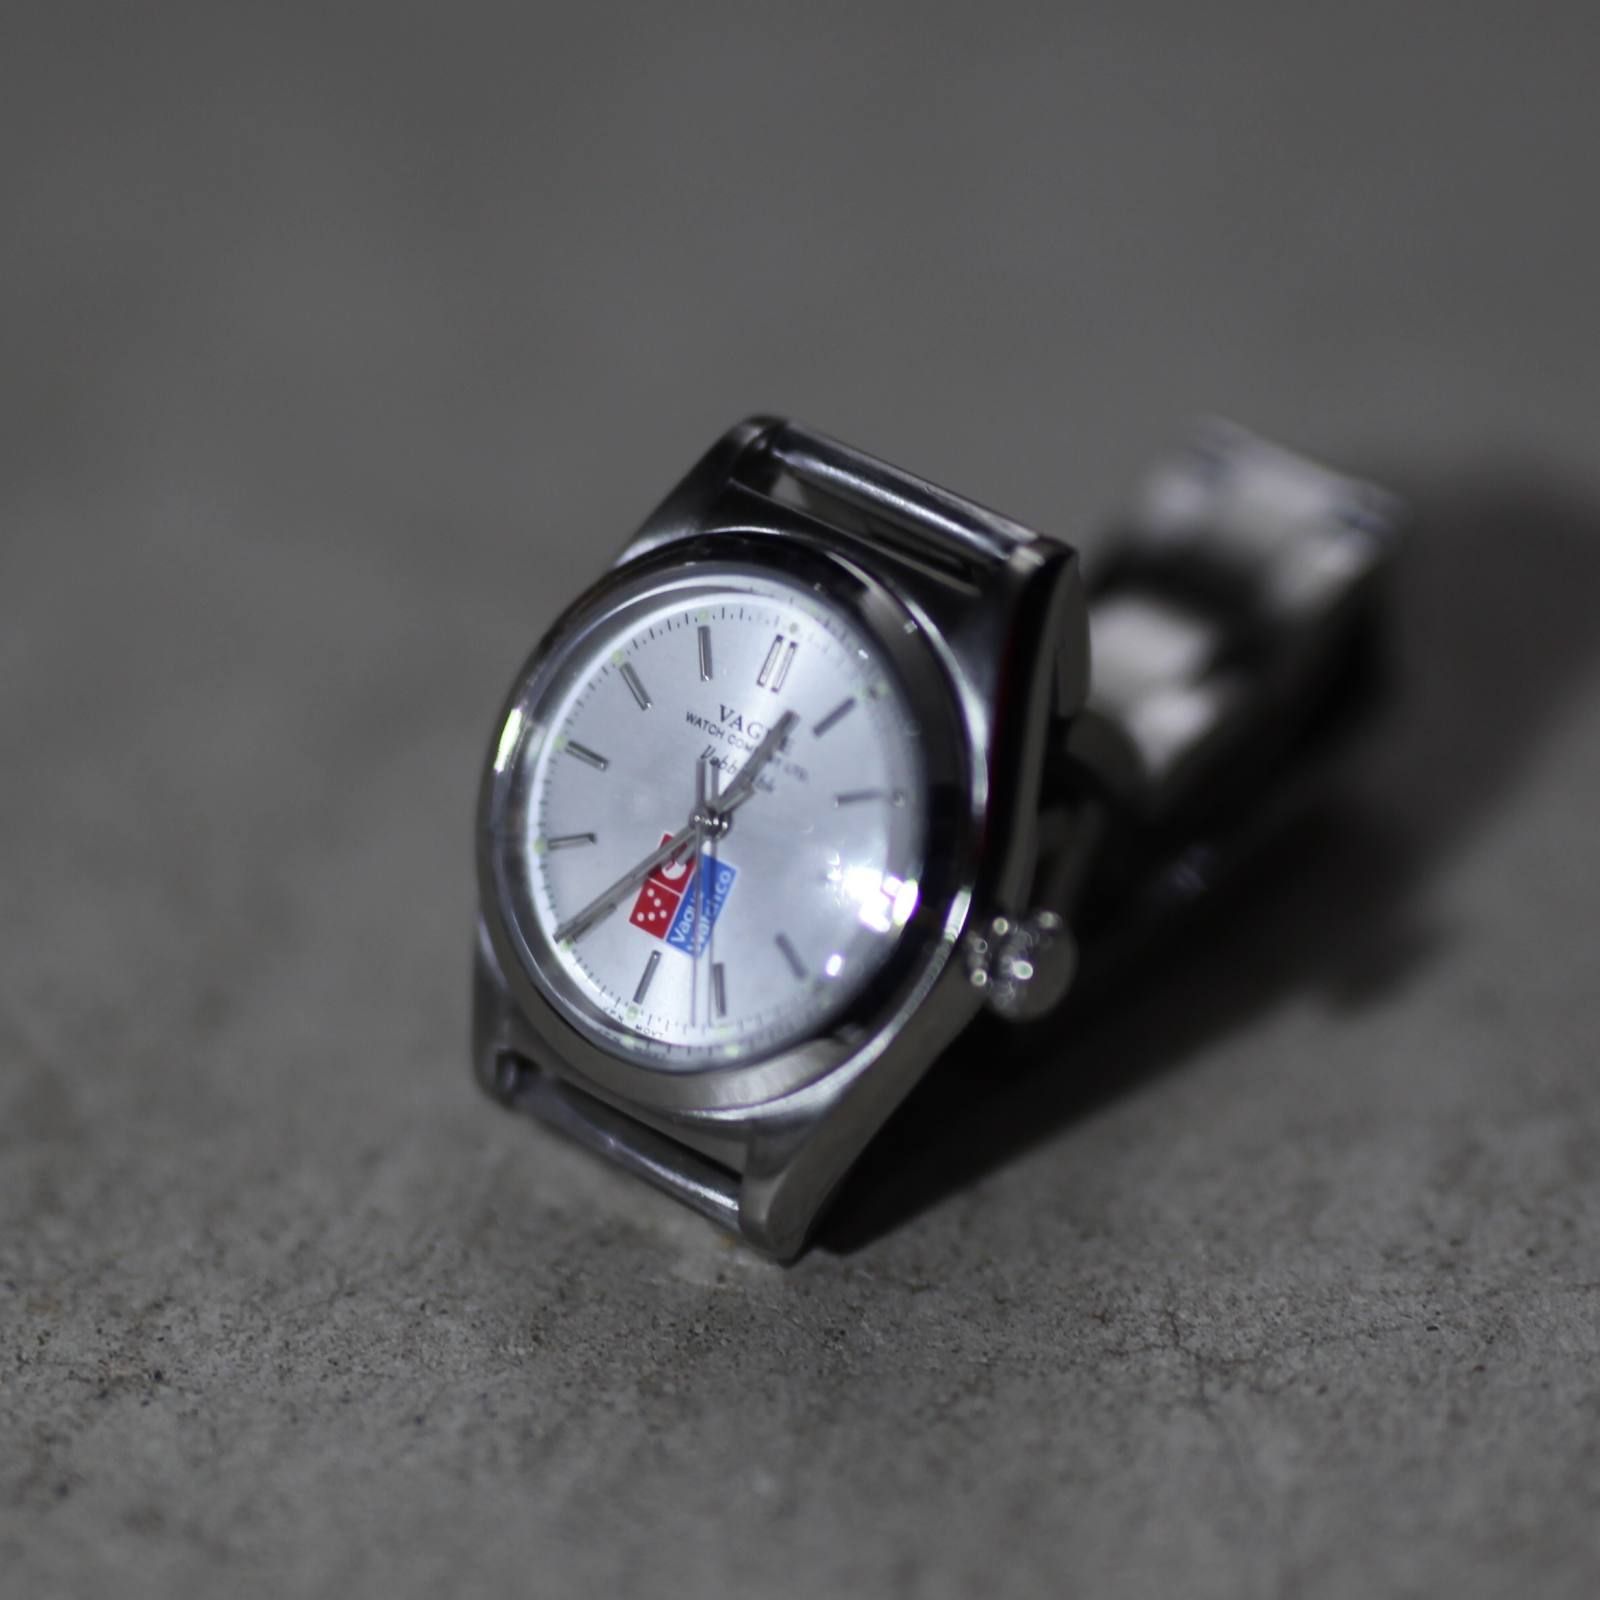 VAGUE WATCH CO. - 【お取り寄せ注文可能】Vabble Stainless | ACRMTSM 